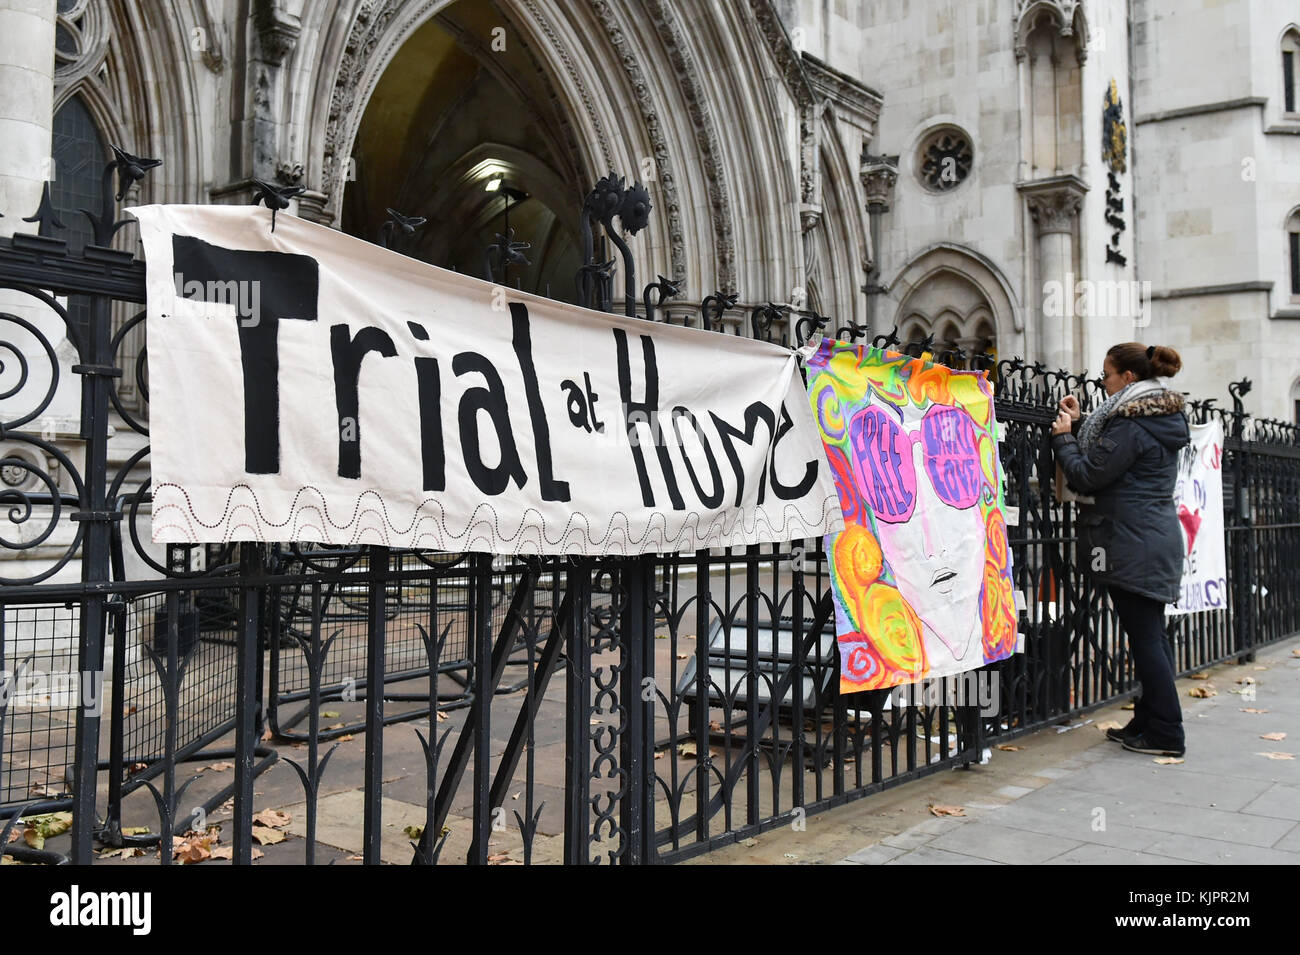 London, United Kingdom. 29 November 2017. Lauri Love arrives at the Royal Courts of Justice in central London for the start of an appeal hearing against extradition to the US where he faces hackng charges. Credit: Peter Manning/Alamy Live News Stock Photo